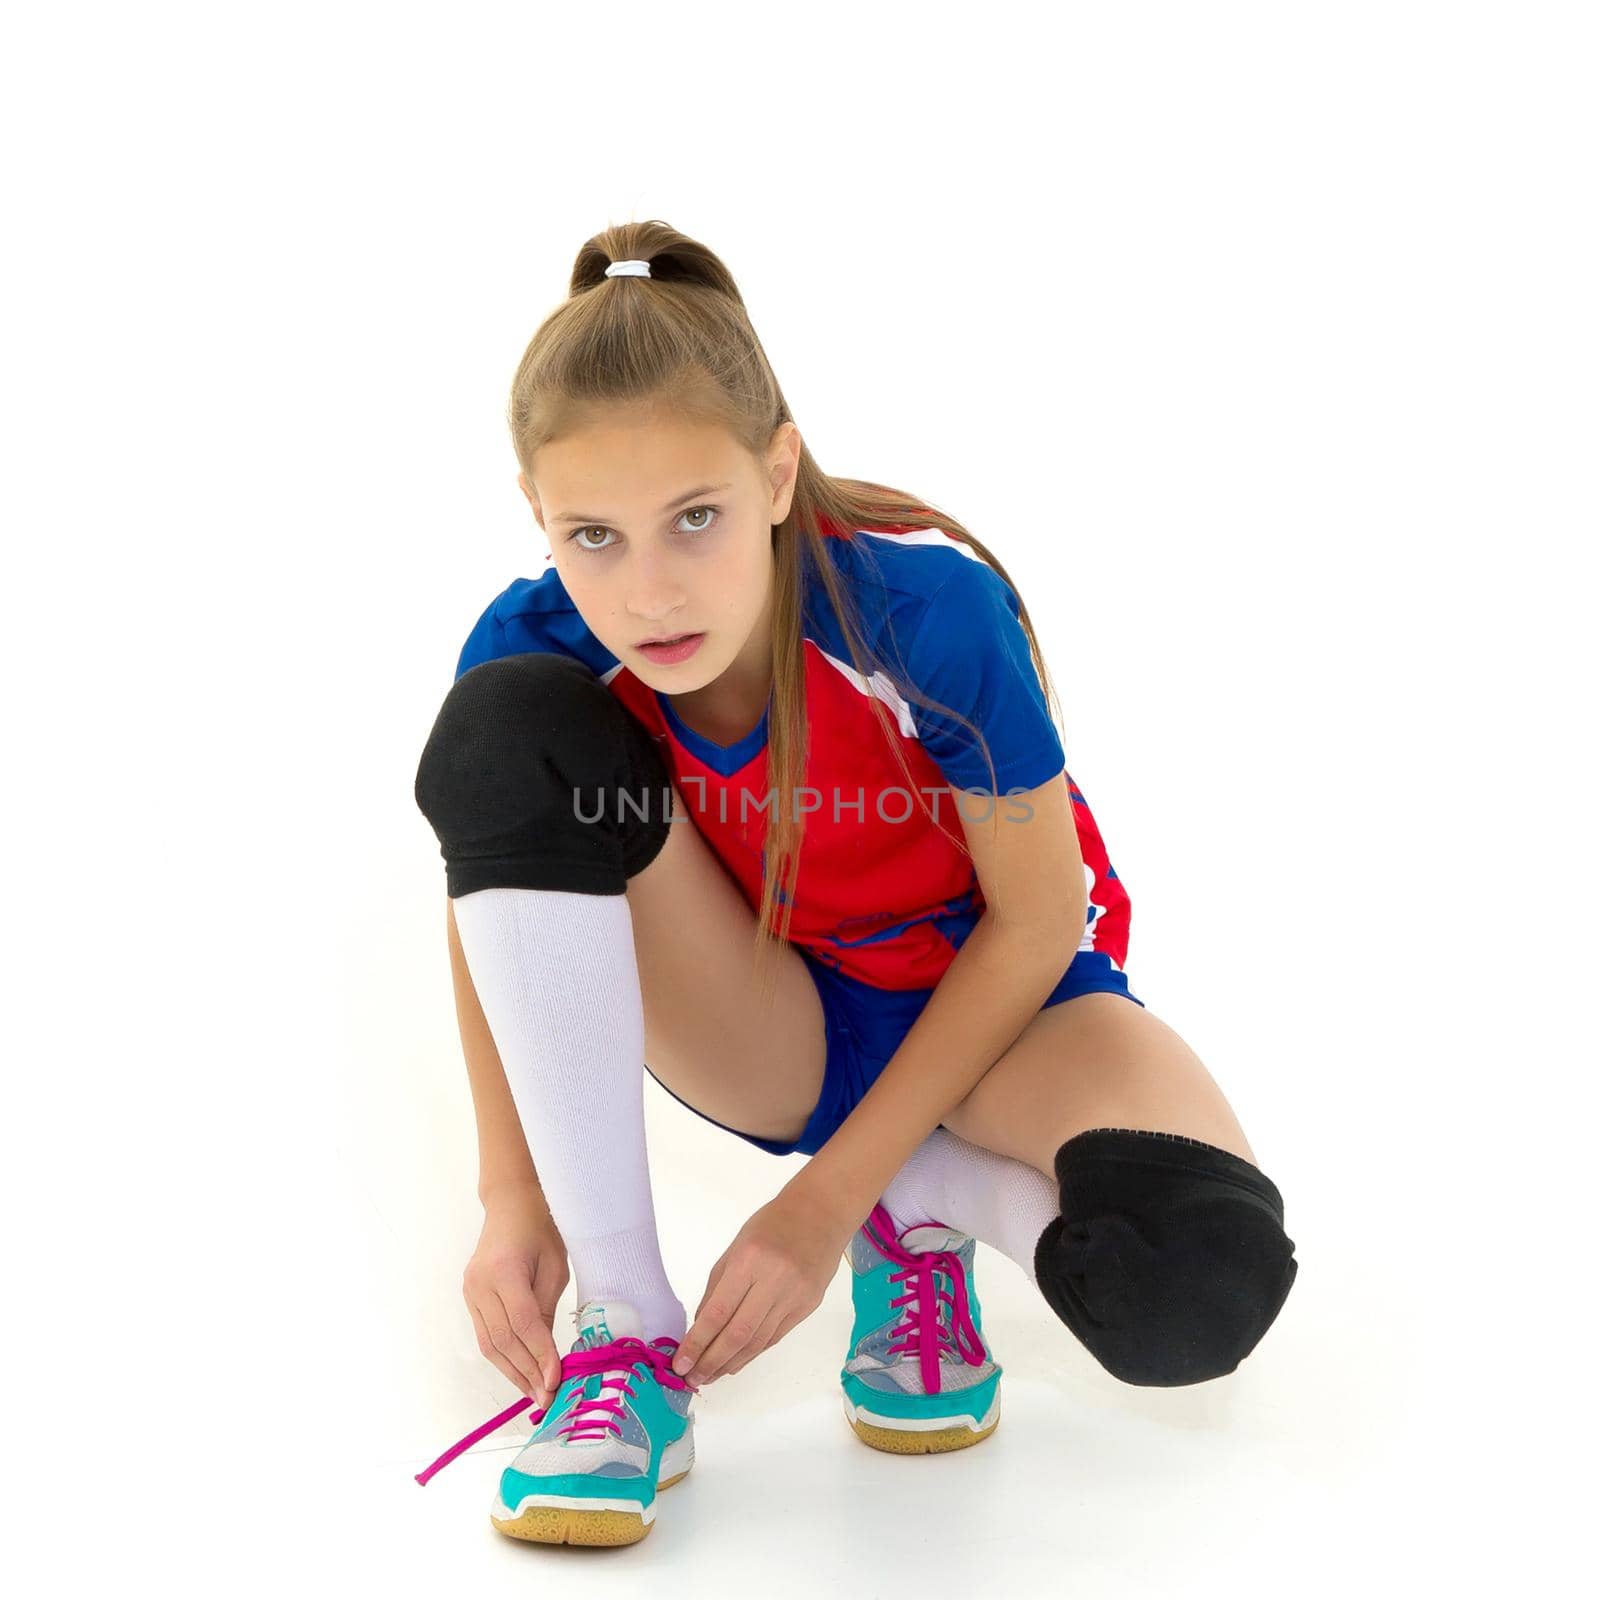 Girl crouching down and tying her shoelaces by kolesnikov_studio